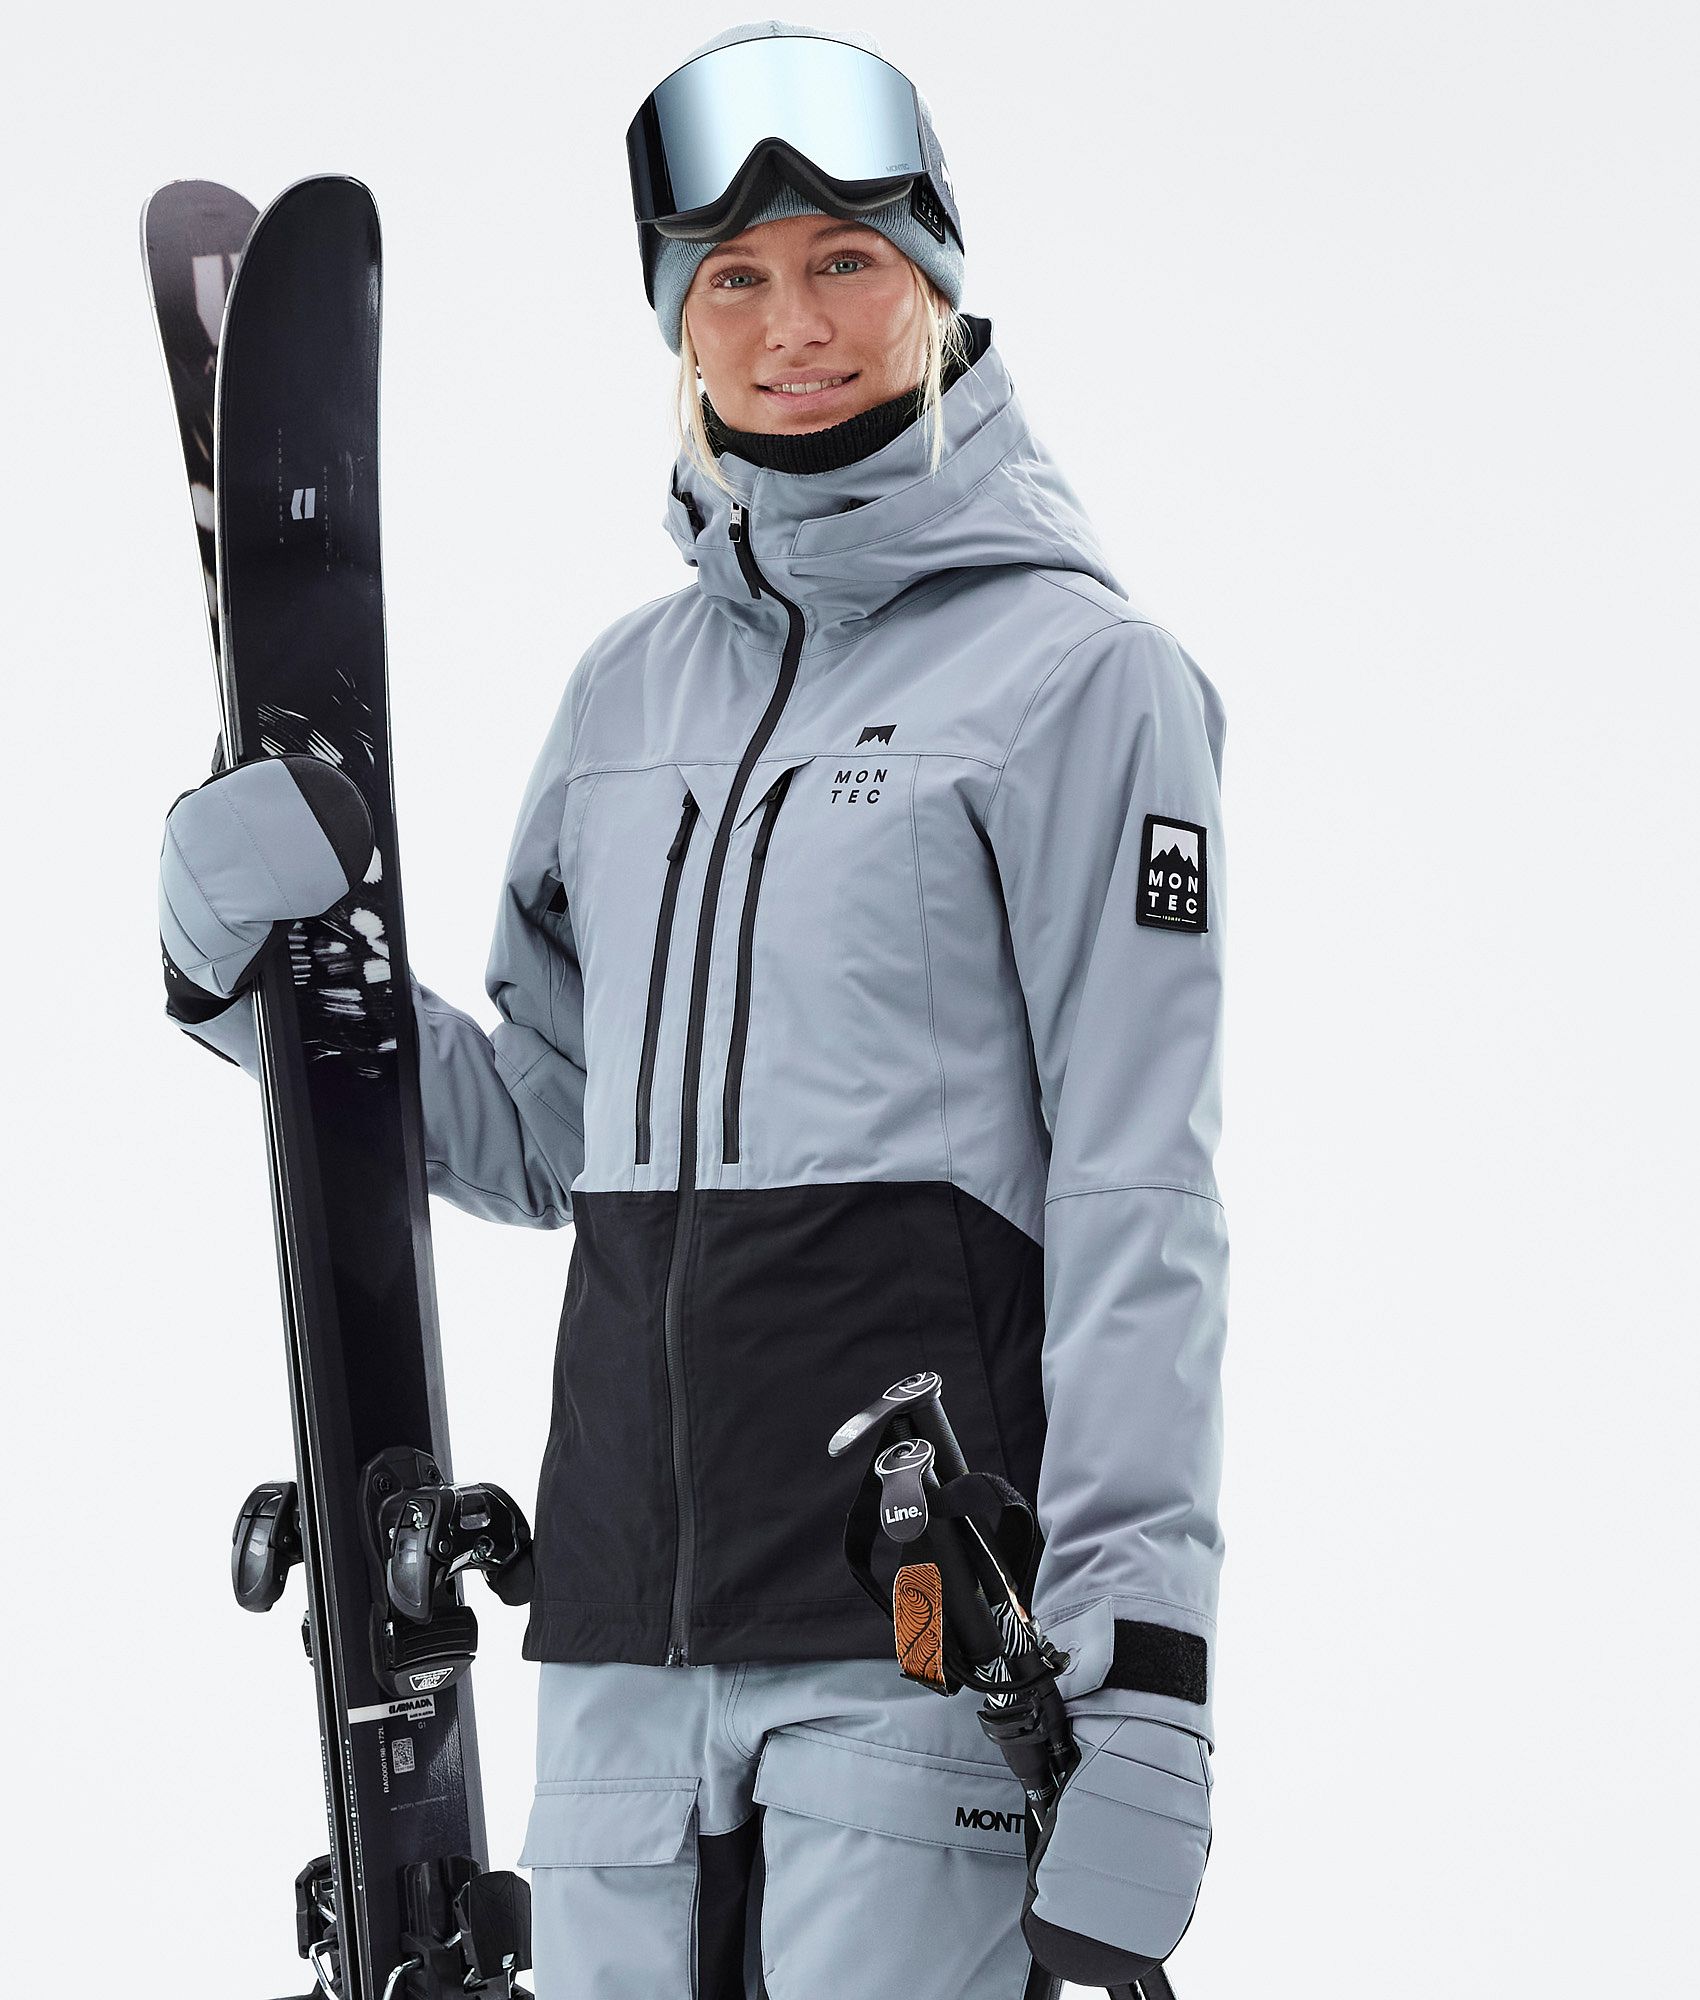 Womens Ski Clothing Free Delivery Montecwear